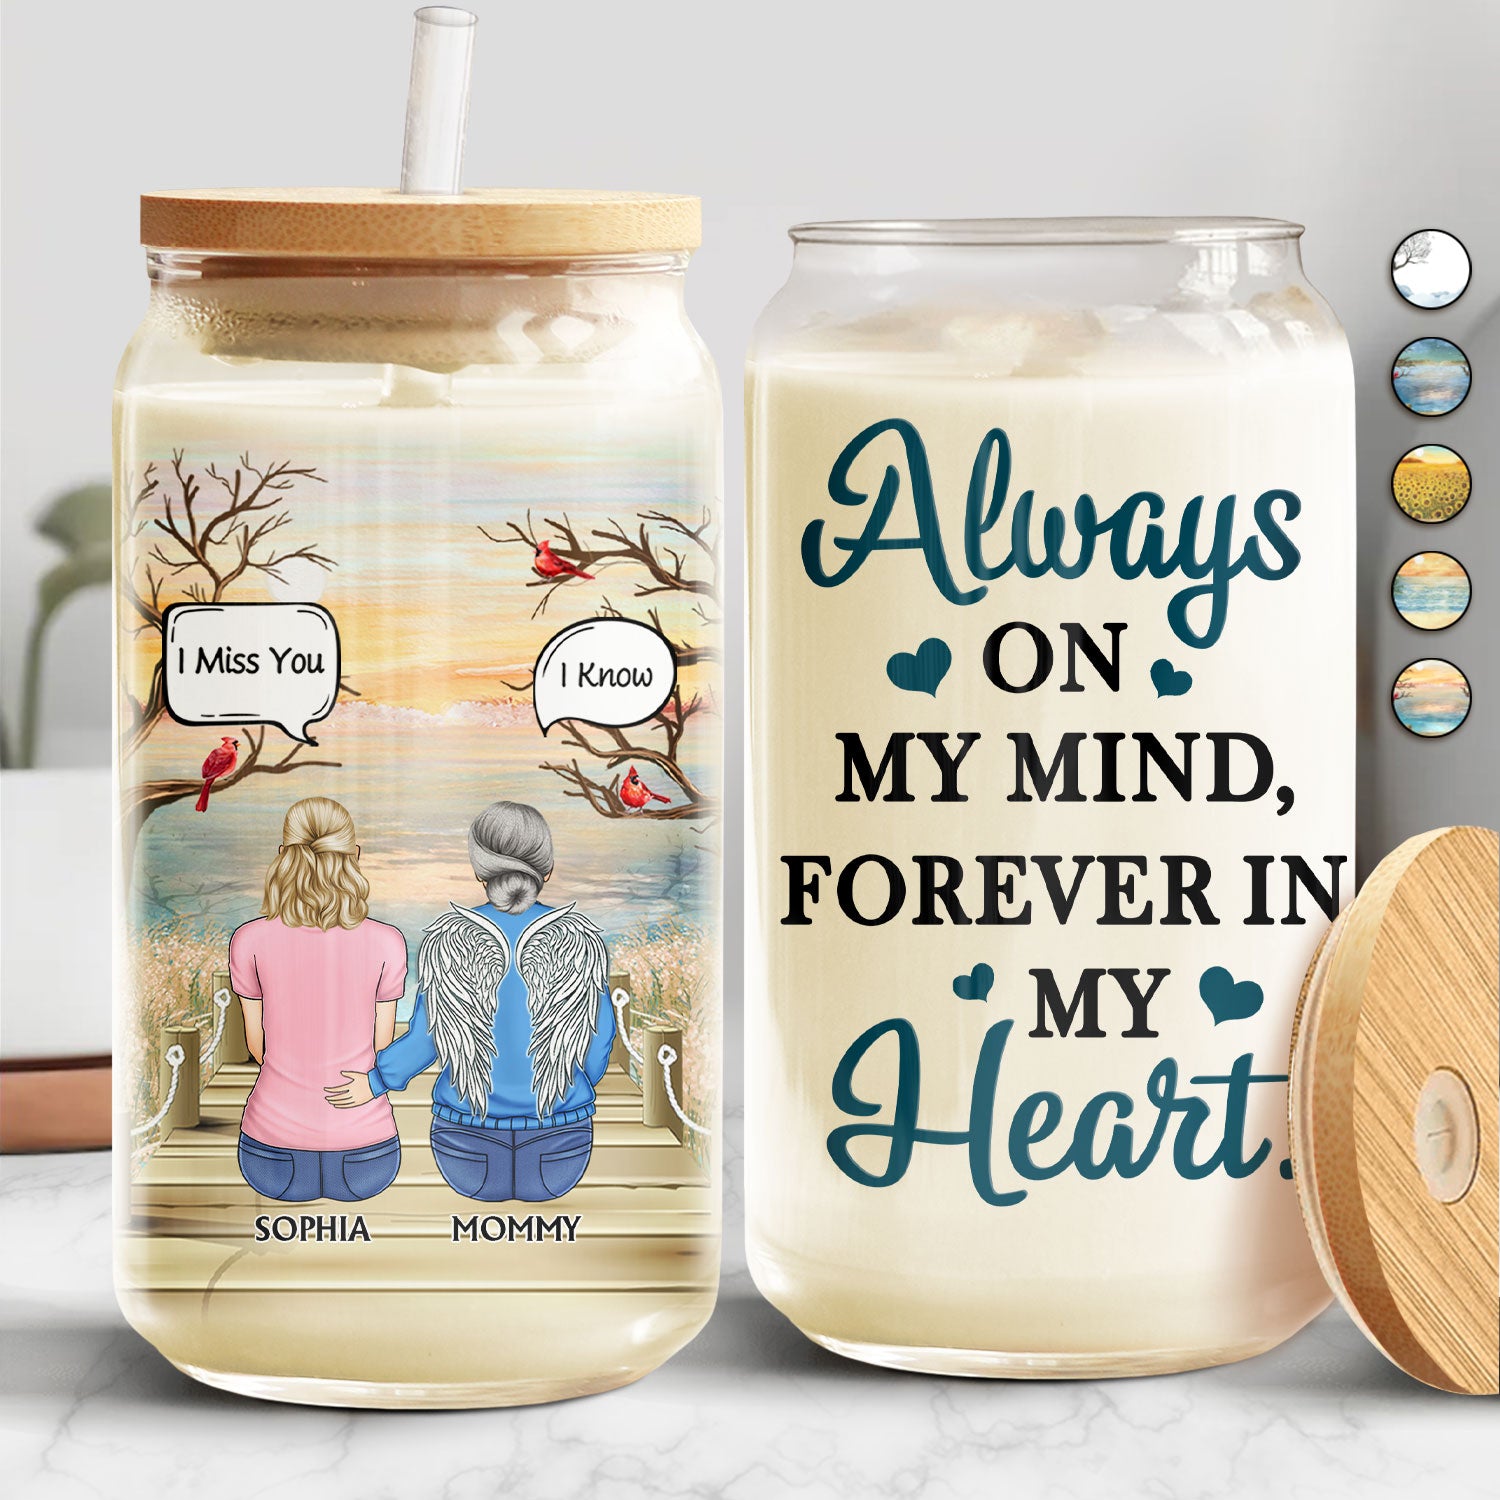 I Miss You I Know - Memorial Gift For Family, Friends, Siblings - Personalized Clear Glass Can